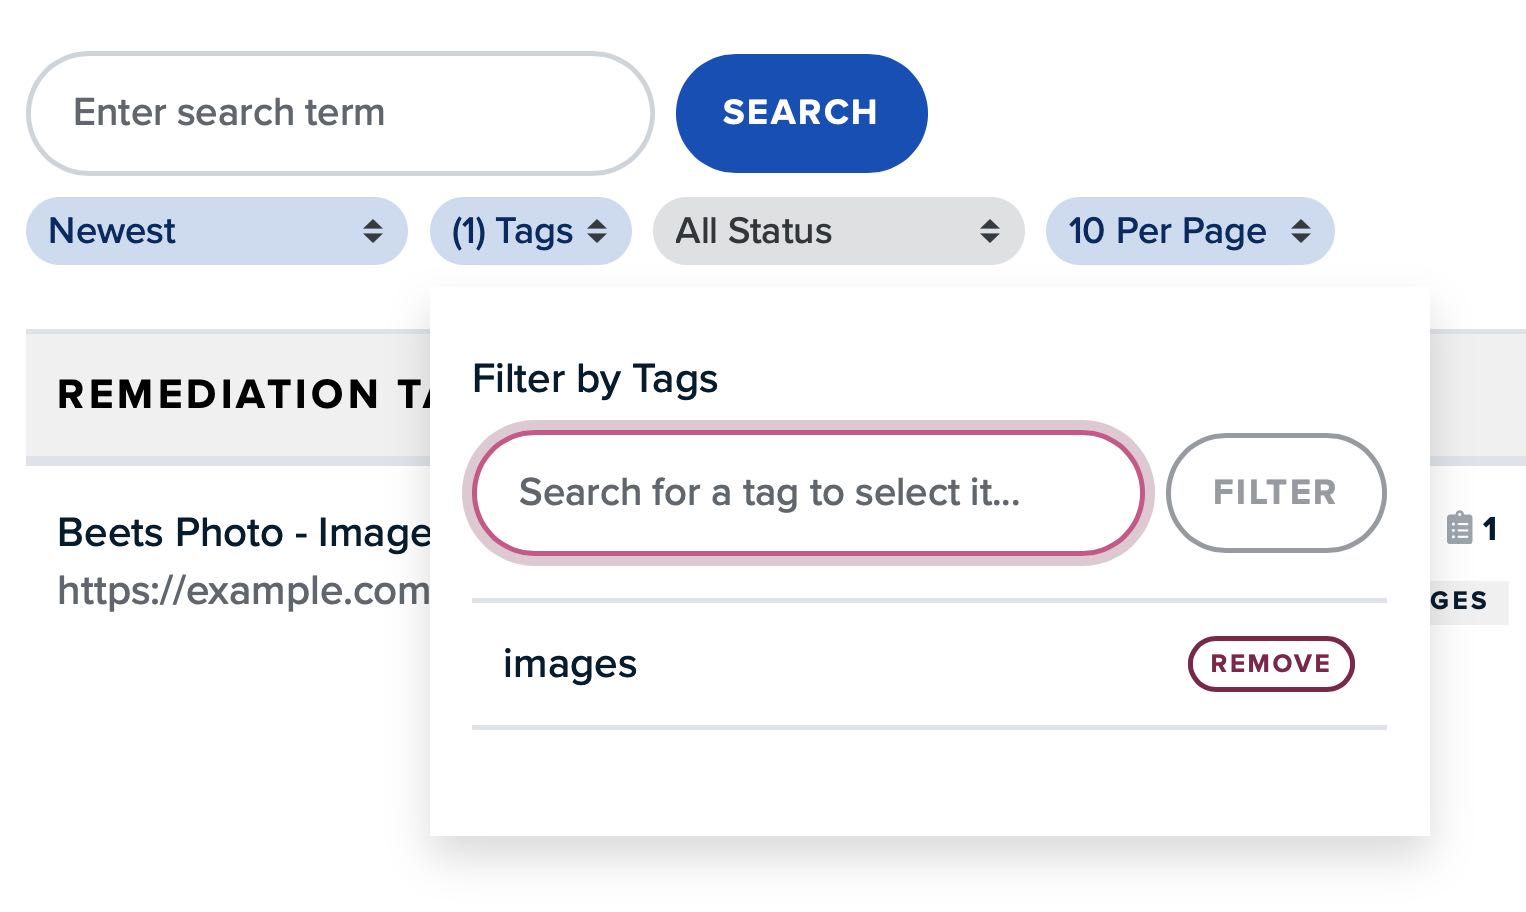 A filter bar to data in a table. There is an active filter for "Tags" filtering by items tagged with "images".